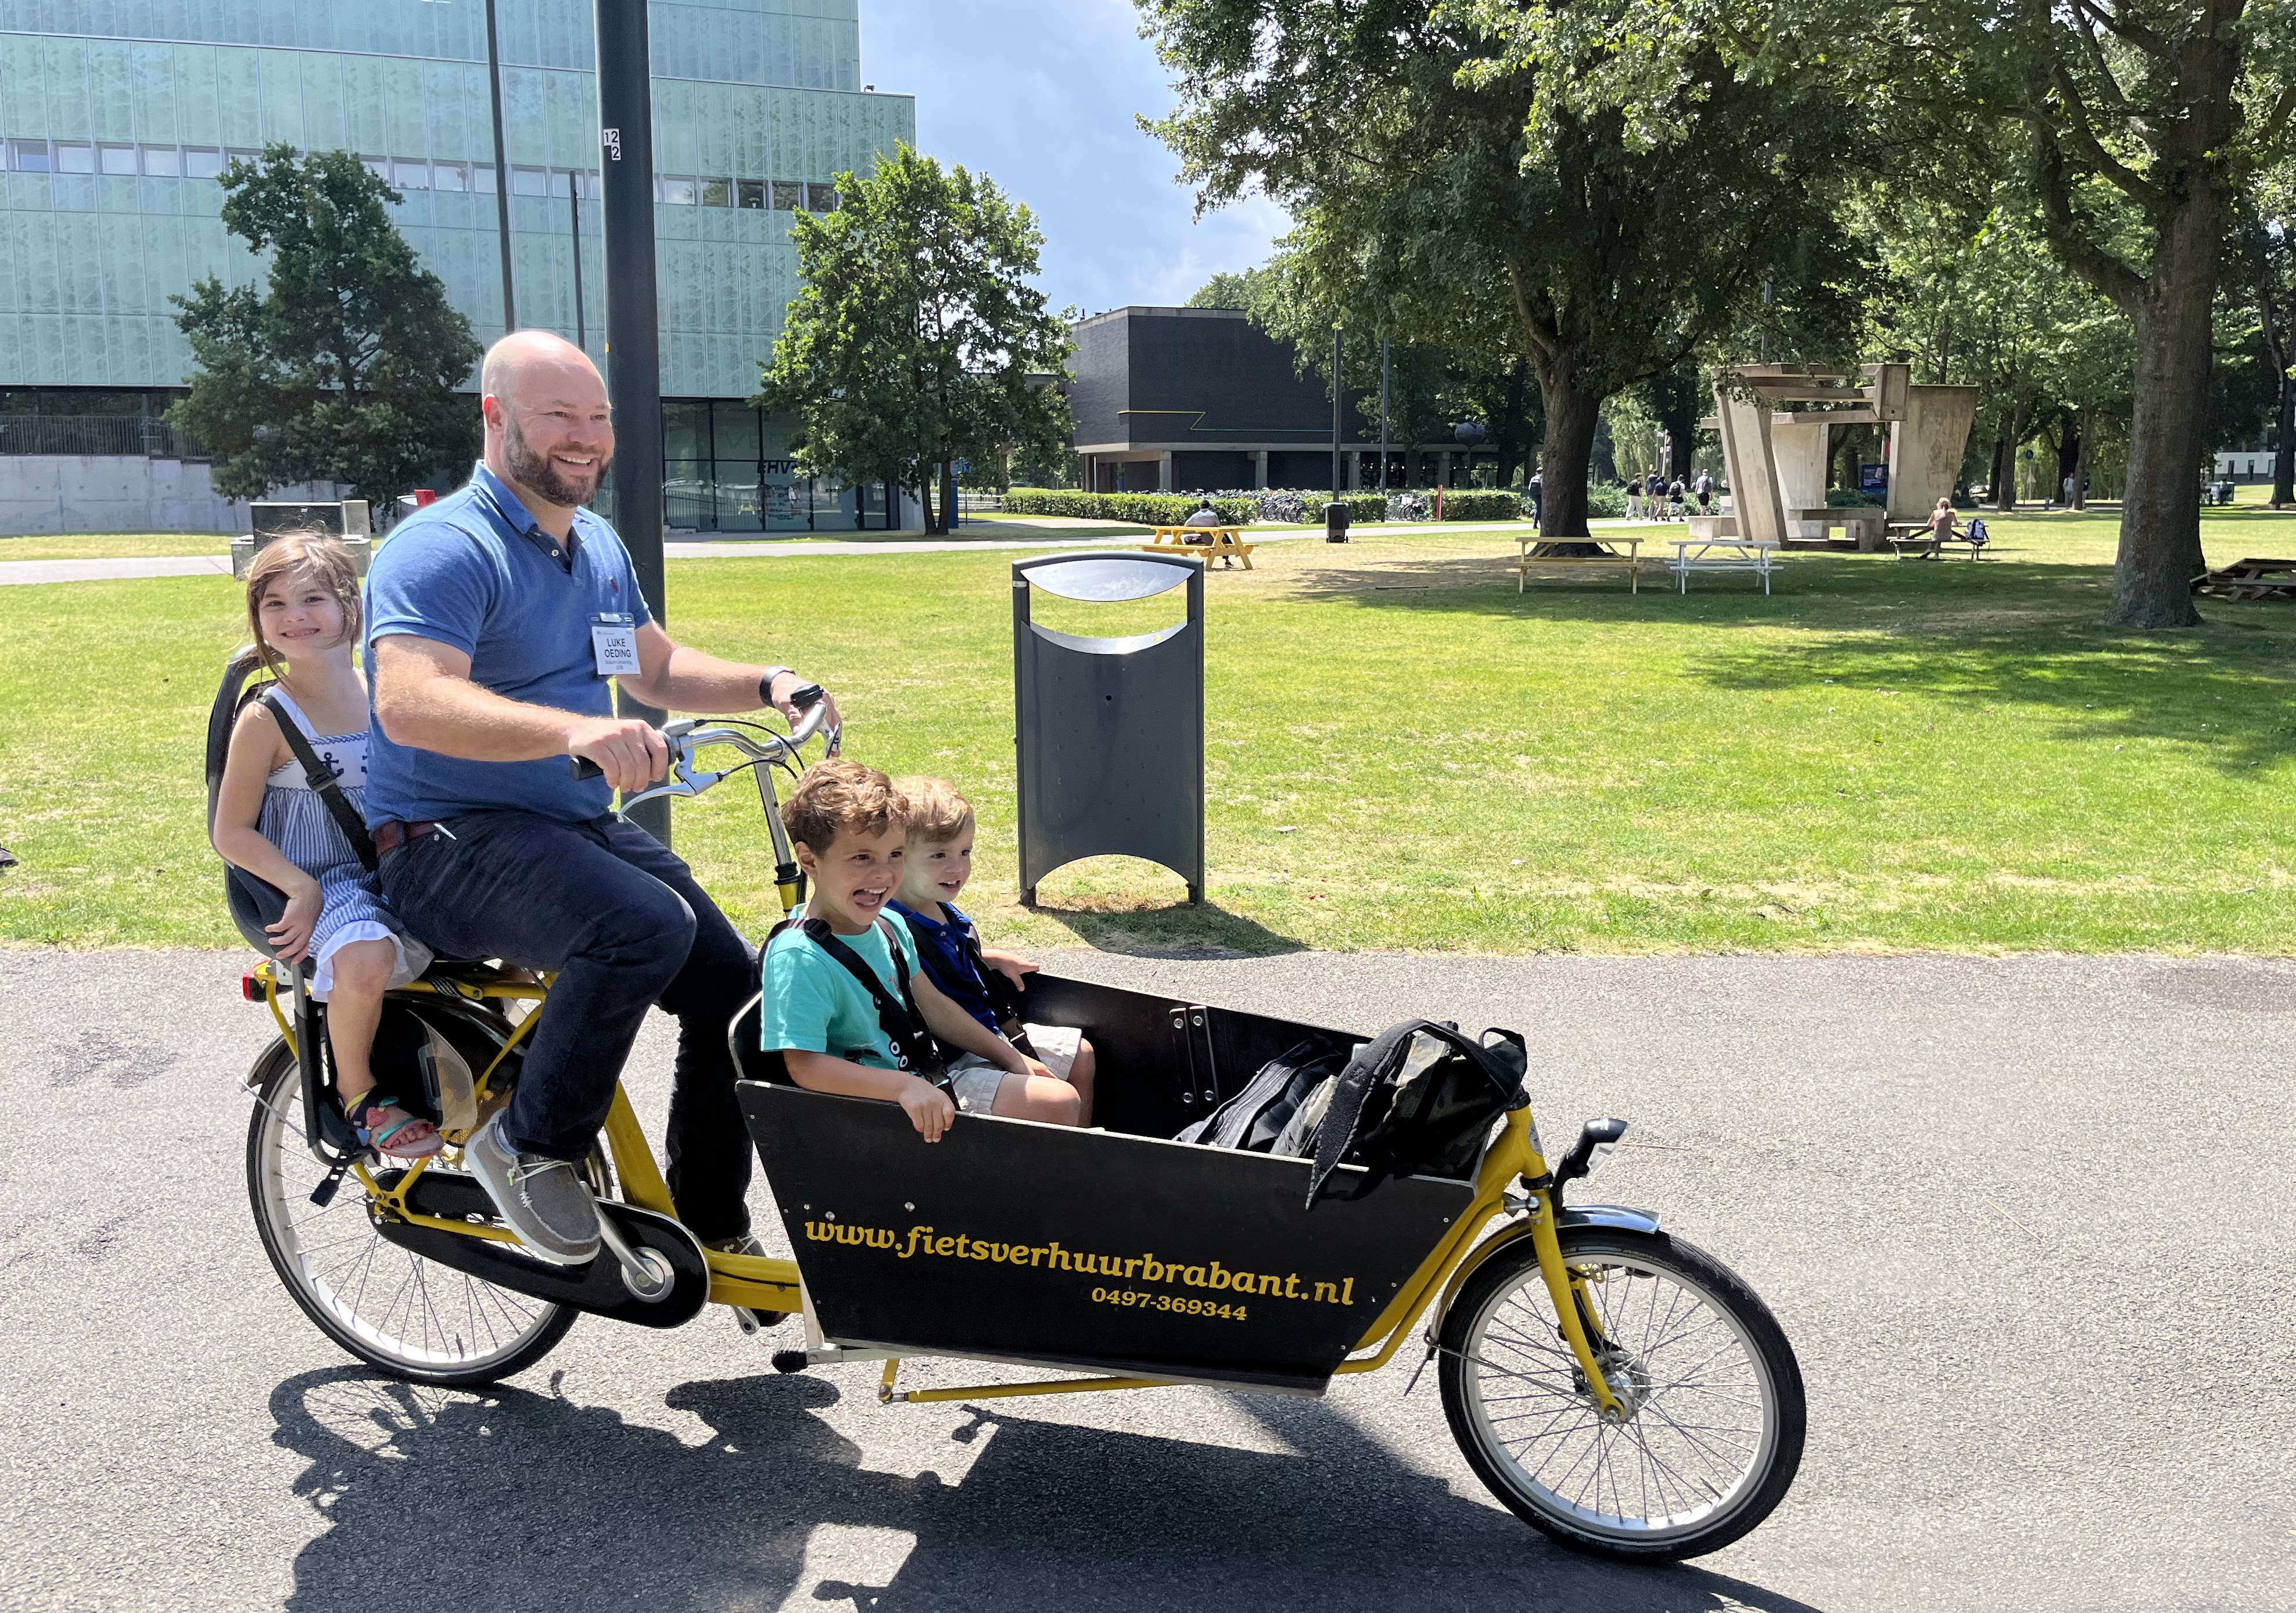 Luke Oeding and his children explore the campus of Eindhoven University of Technology in a cargo bike during a break from the technical sessions at the 2023 SIAM Conference on Applied Algebraic Geometry, which took place in July 2023. Image courtesy of Michael Burr.